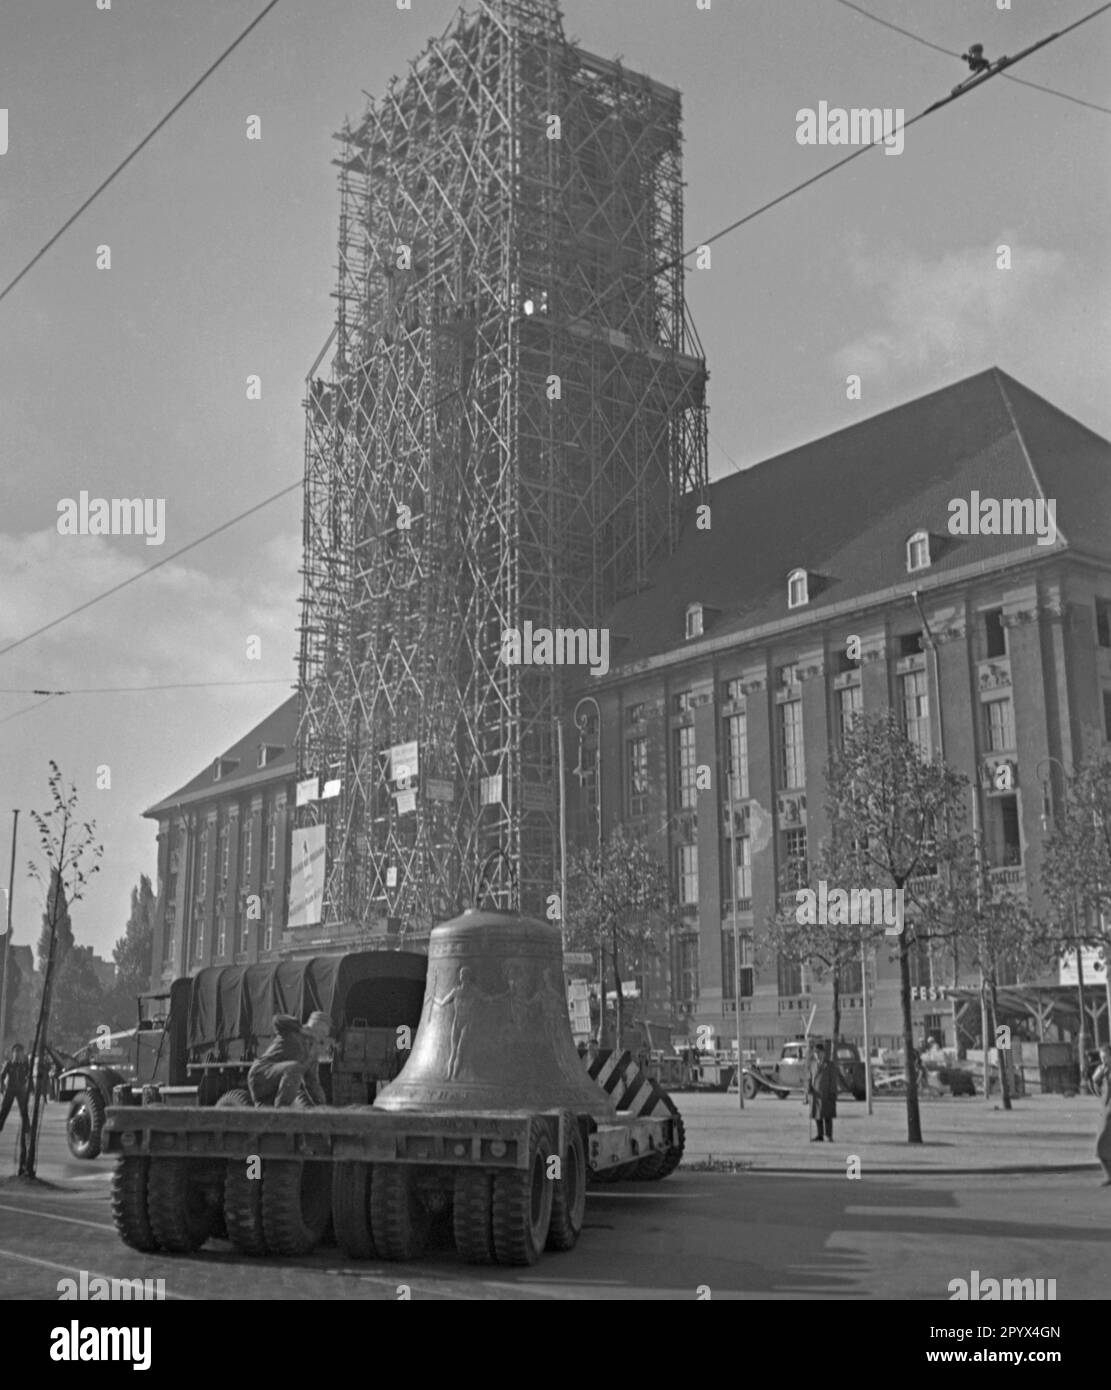 Photo of the Freedom Bell on the back of a low loader of the US Army on Rathausplatz shortly before its installation in the tower of the seat of the Governing Mayor of Berlin, Ernst Reuter (1948-1953) on October 21, 1950. In the background, construction workers in front of the partially destroyed facade of the building. On the scaffolding a poster of the American occupation forces (inscription: Emergency Programme of Berlin with European Recovery Program). The bell sounded for the first time at the ceremony on the United Nations Day (UN) on 24 October Stock Photo